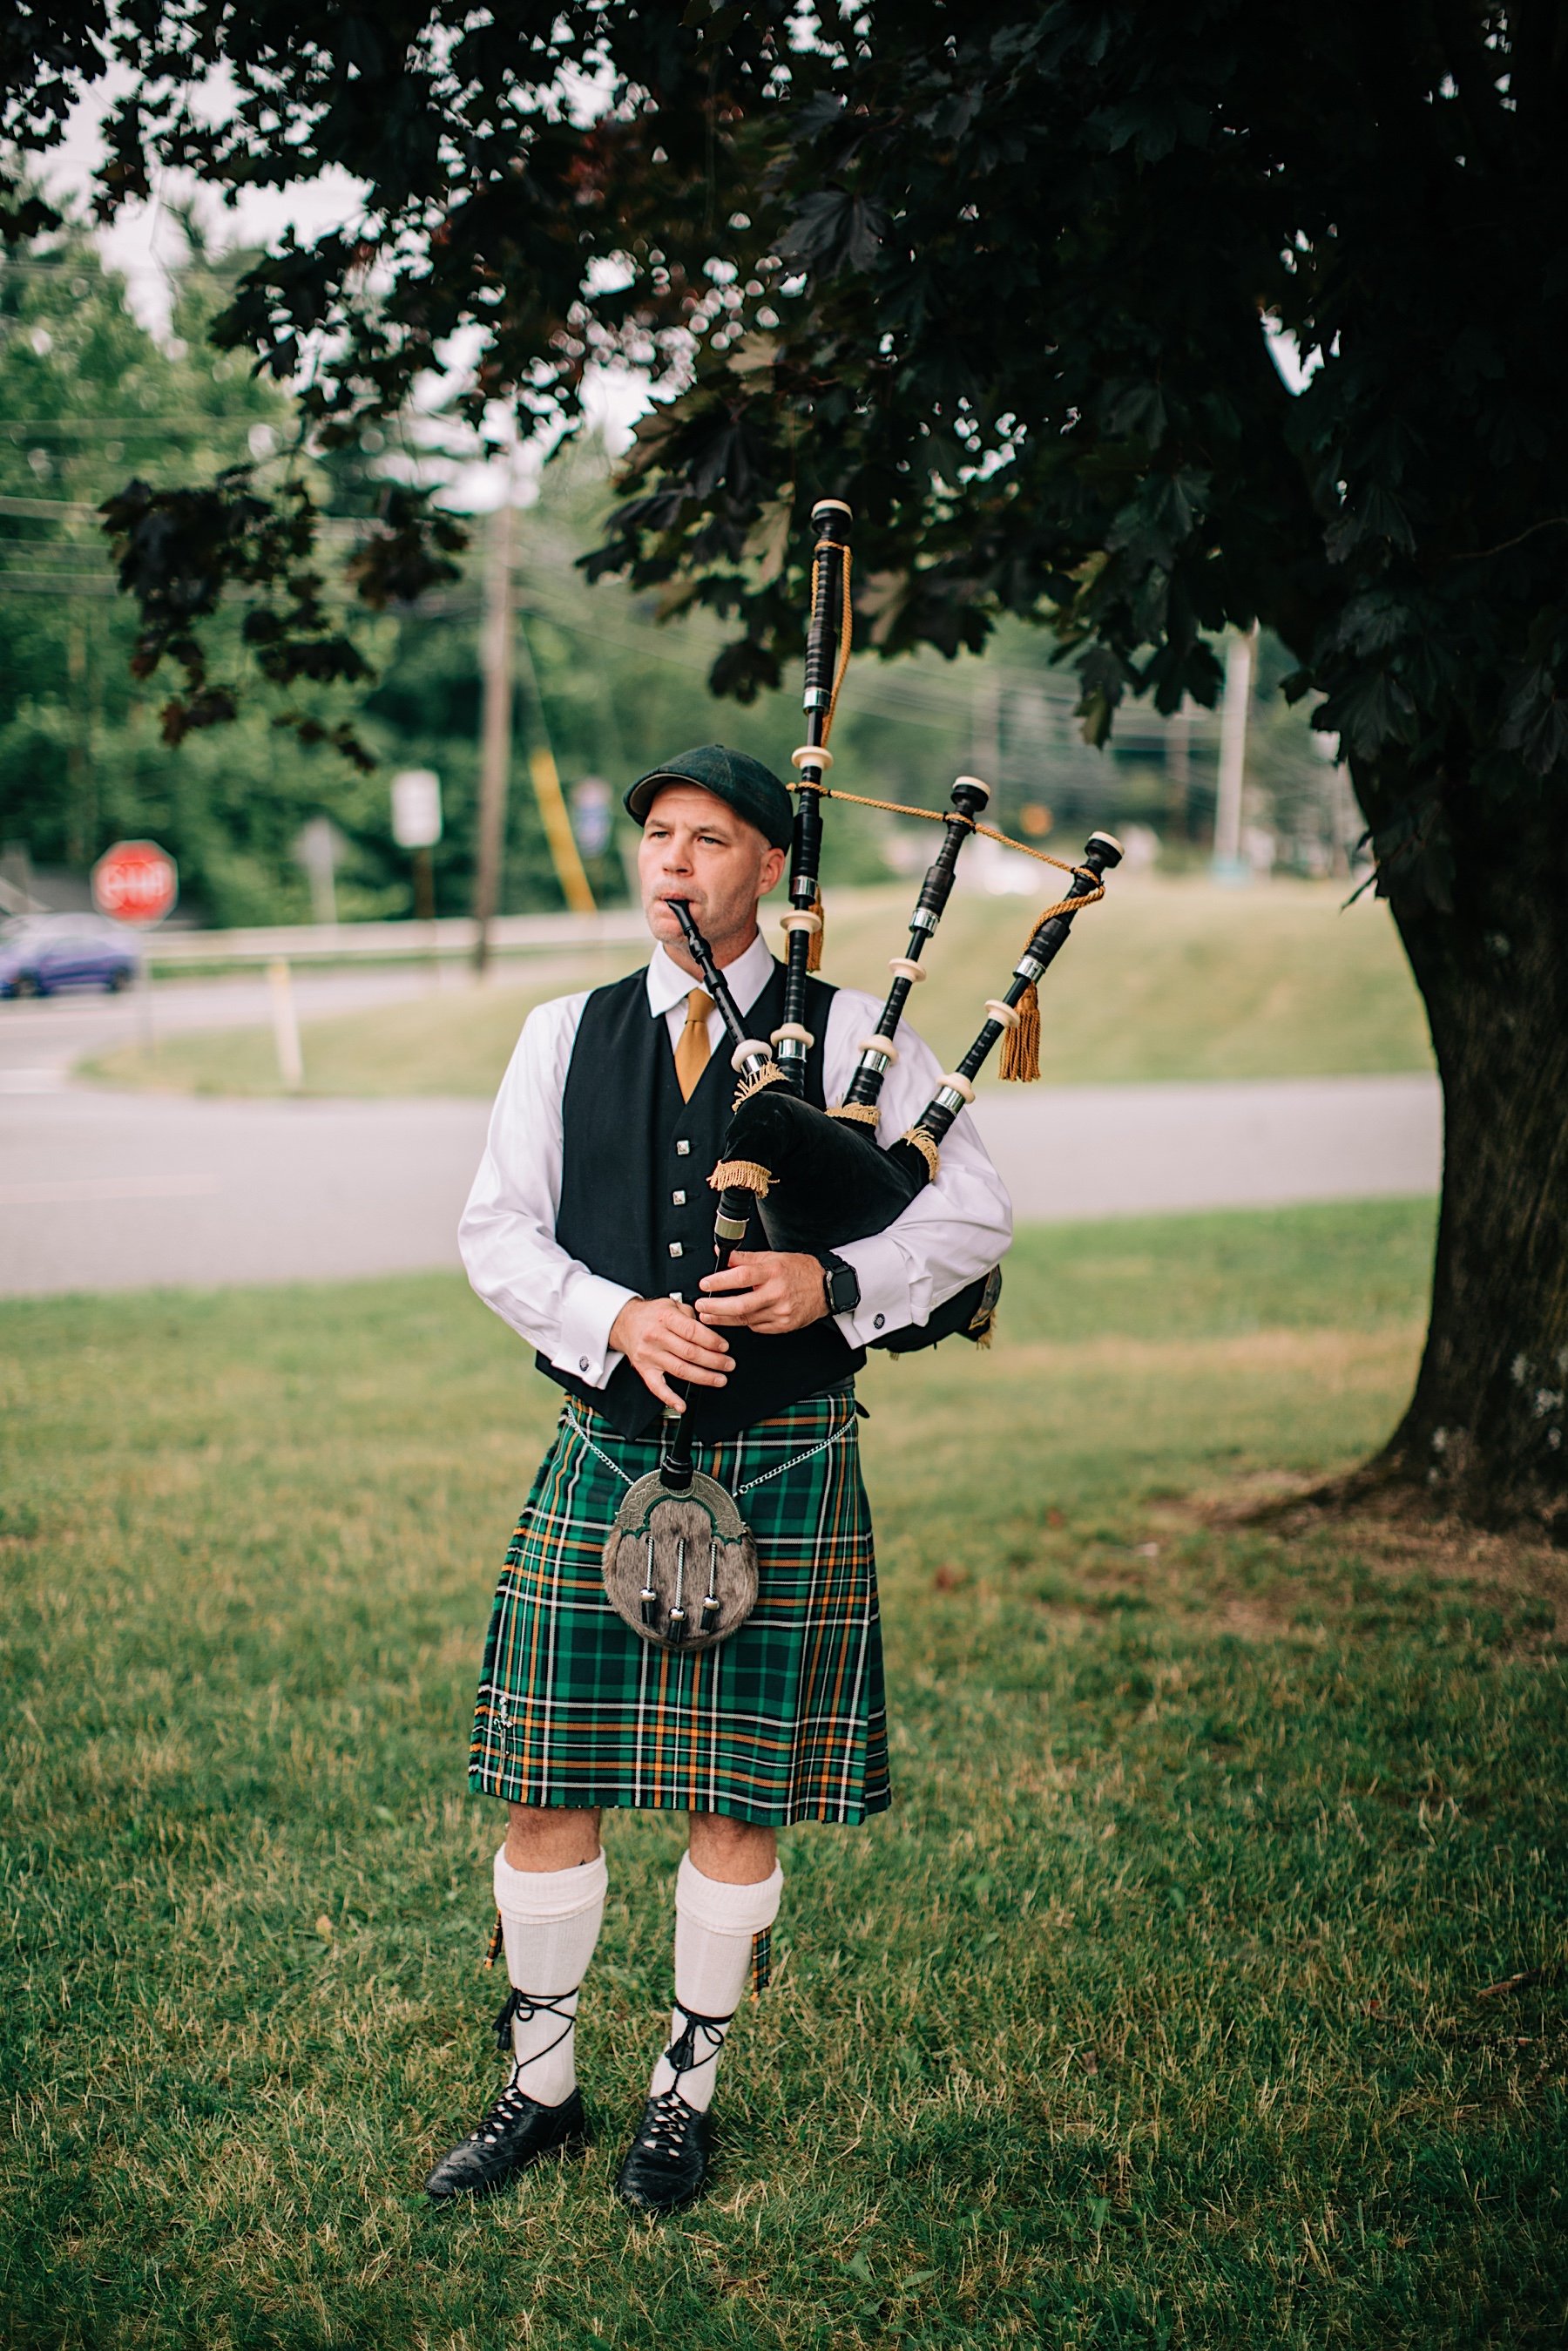 61_bagpipes at church ceremony north jersey wedding.jpg